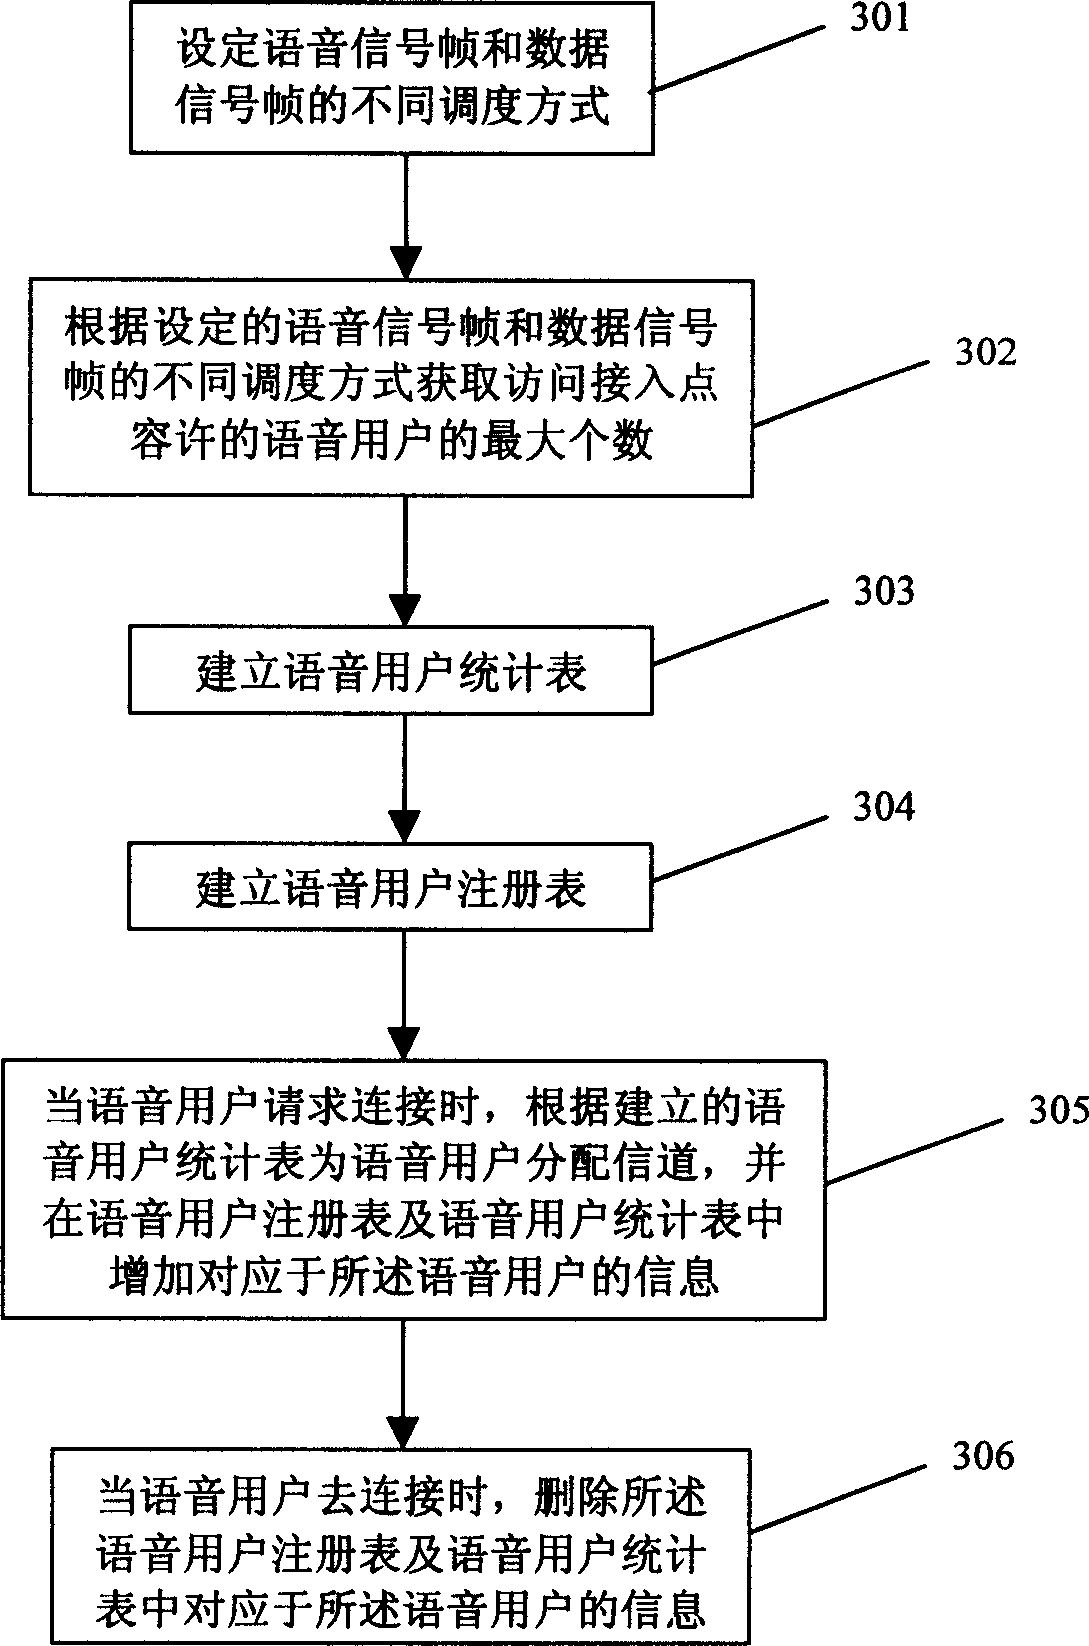 Method and device for transmitting network sound in radio local area network